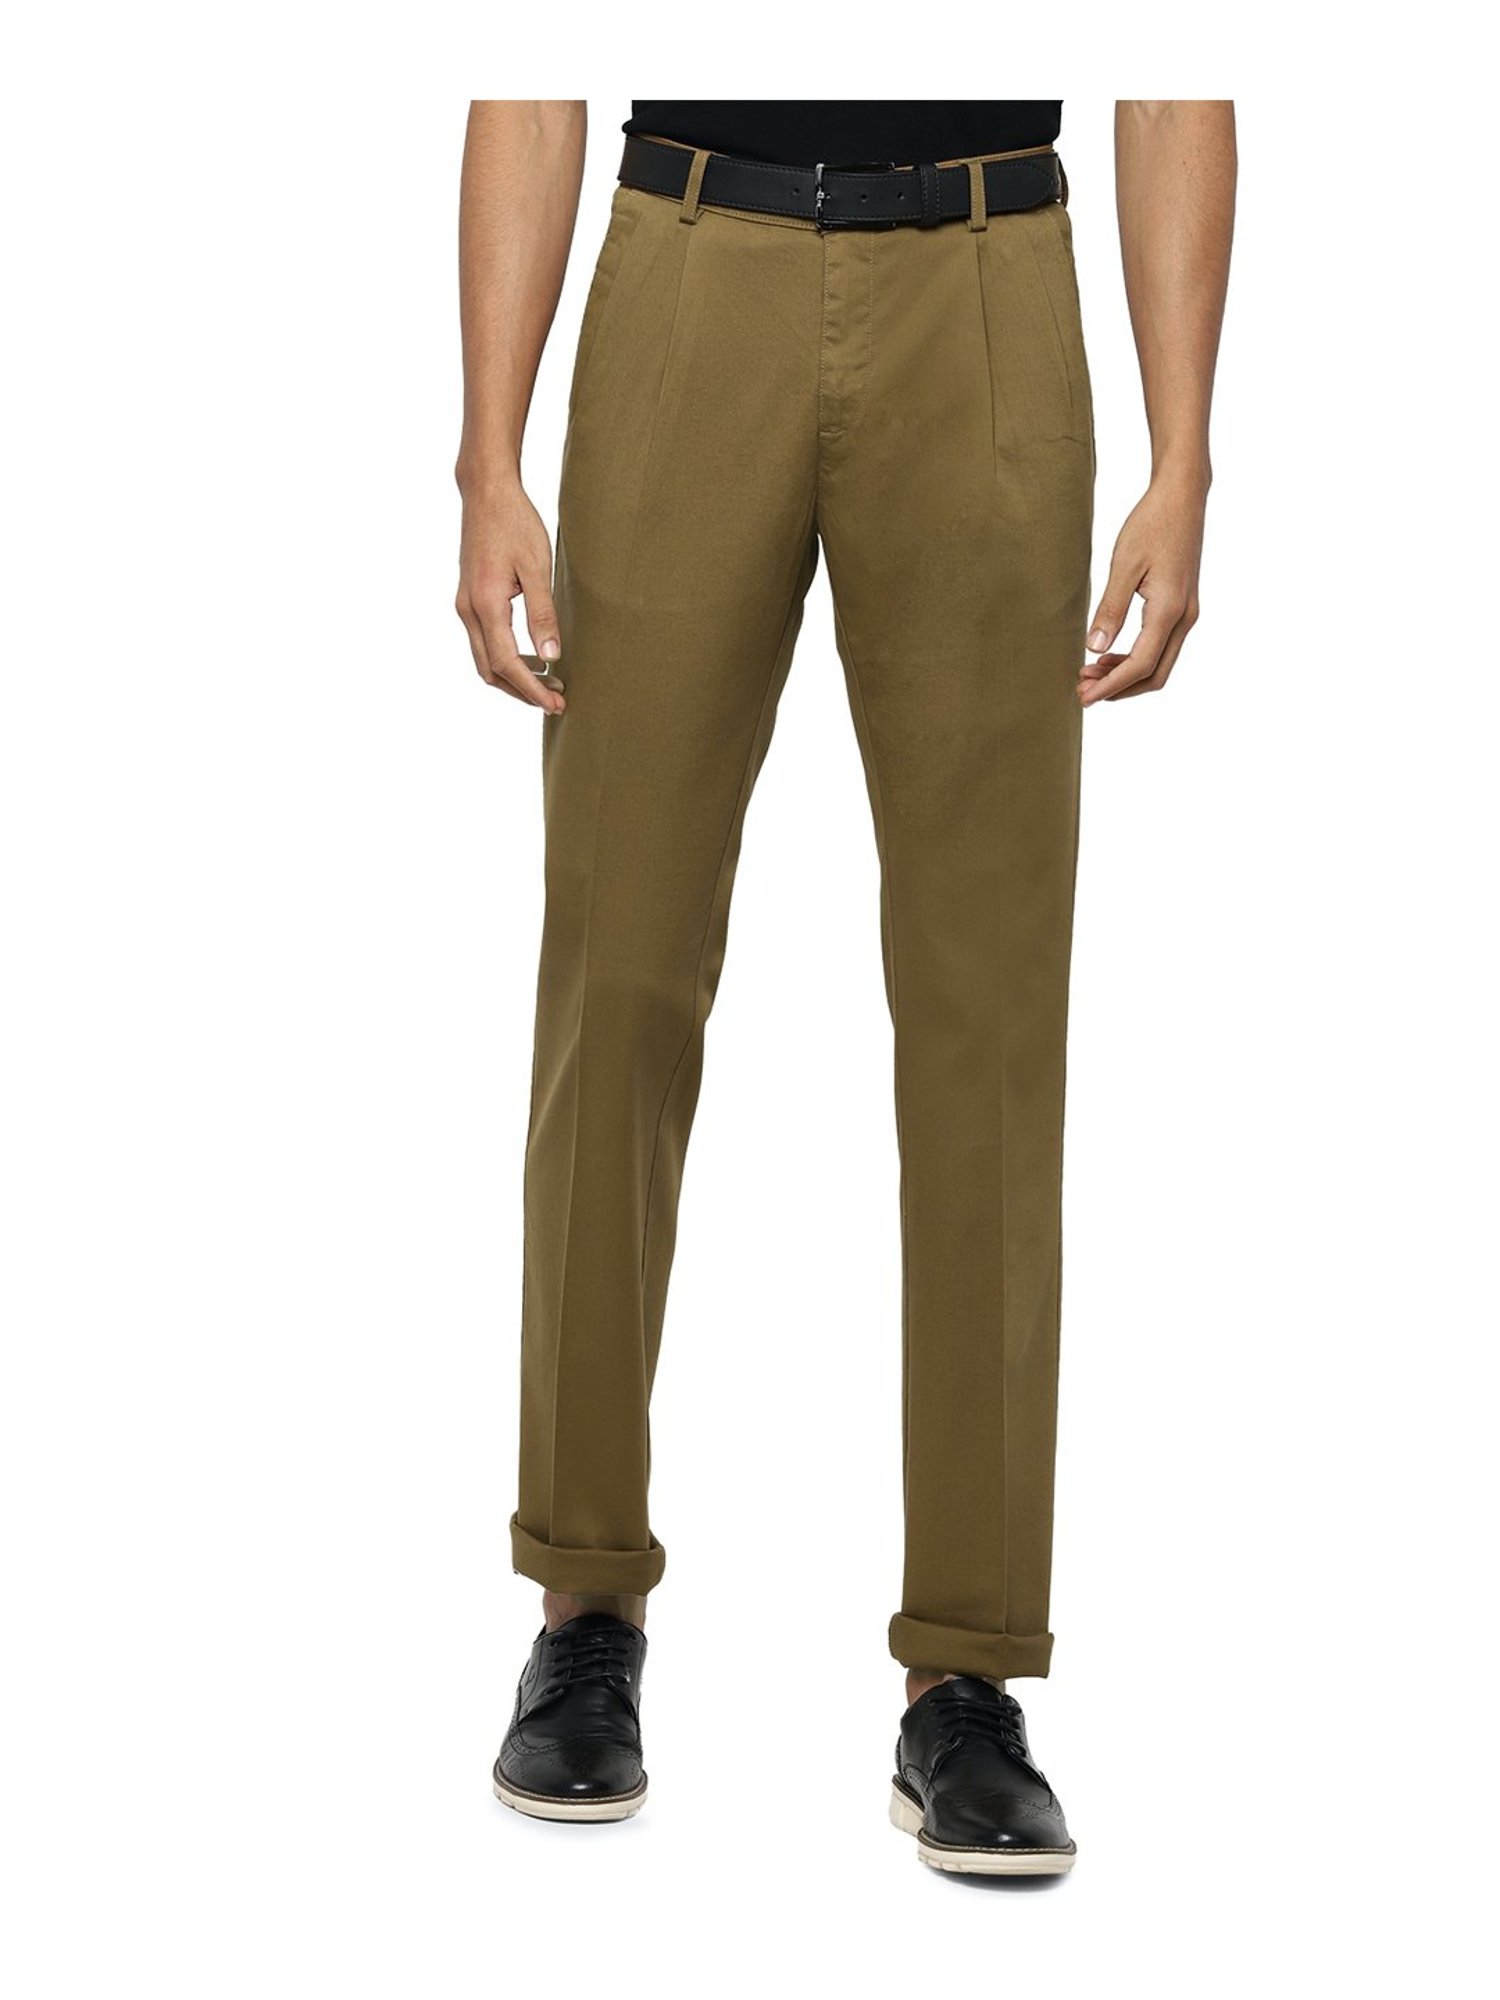 Buy ALLEN SOLLY Mens Pleated Front Slim Fit Solid Formal Trousers   Shoppers Stop